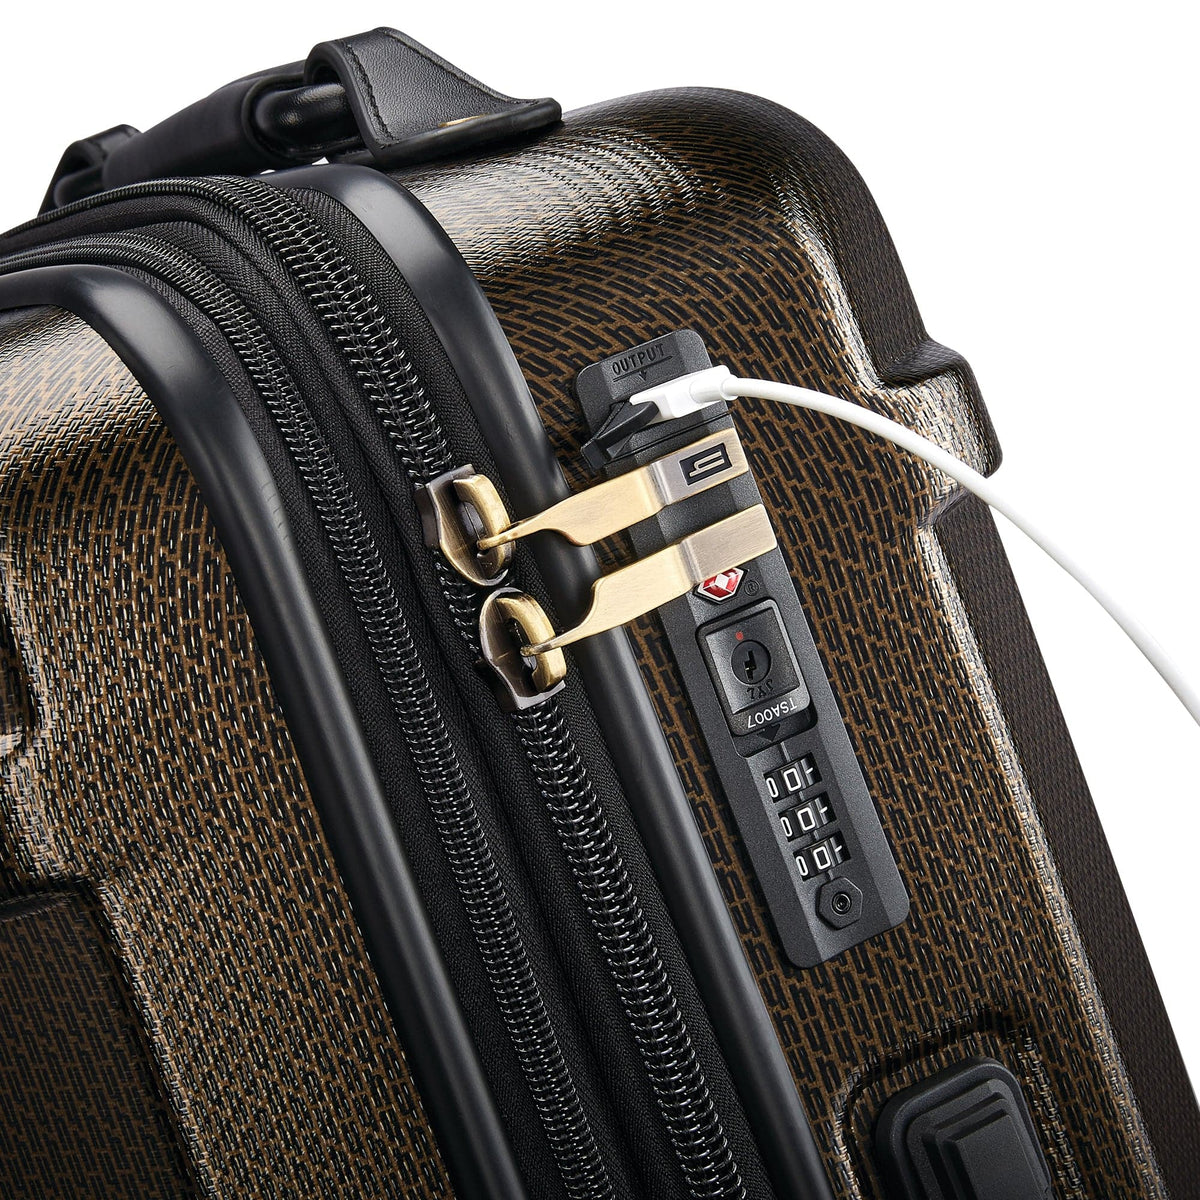 Hartmann Century Deluxe Hardside Carry - On Expandable Spinner Luggage